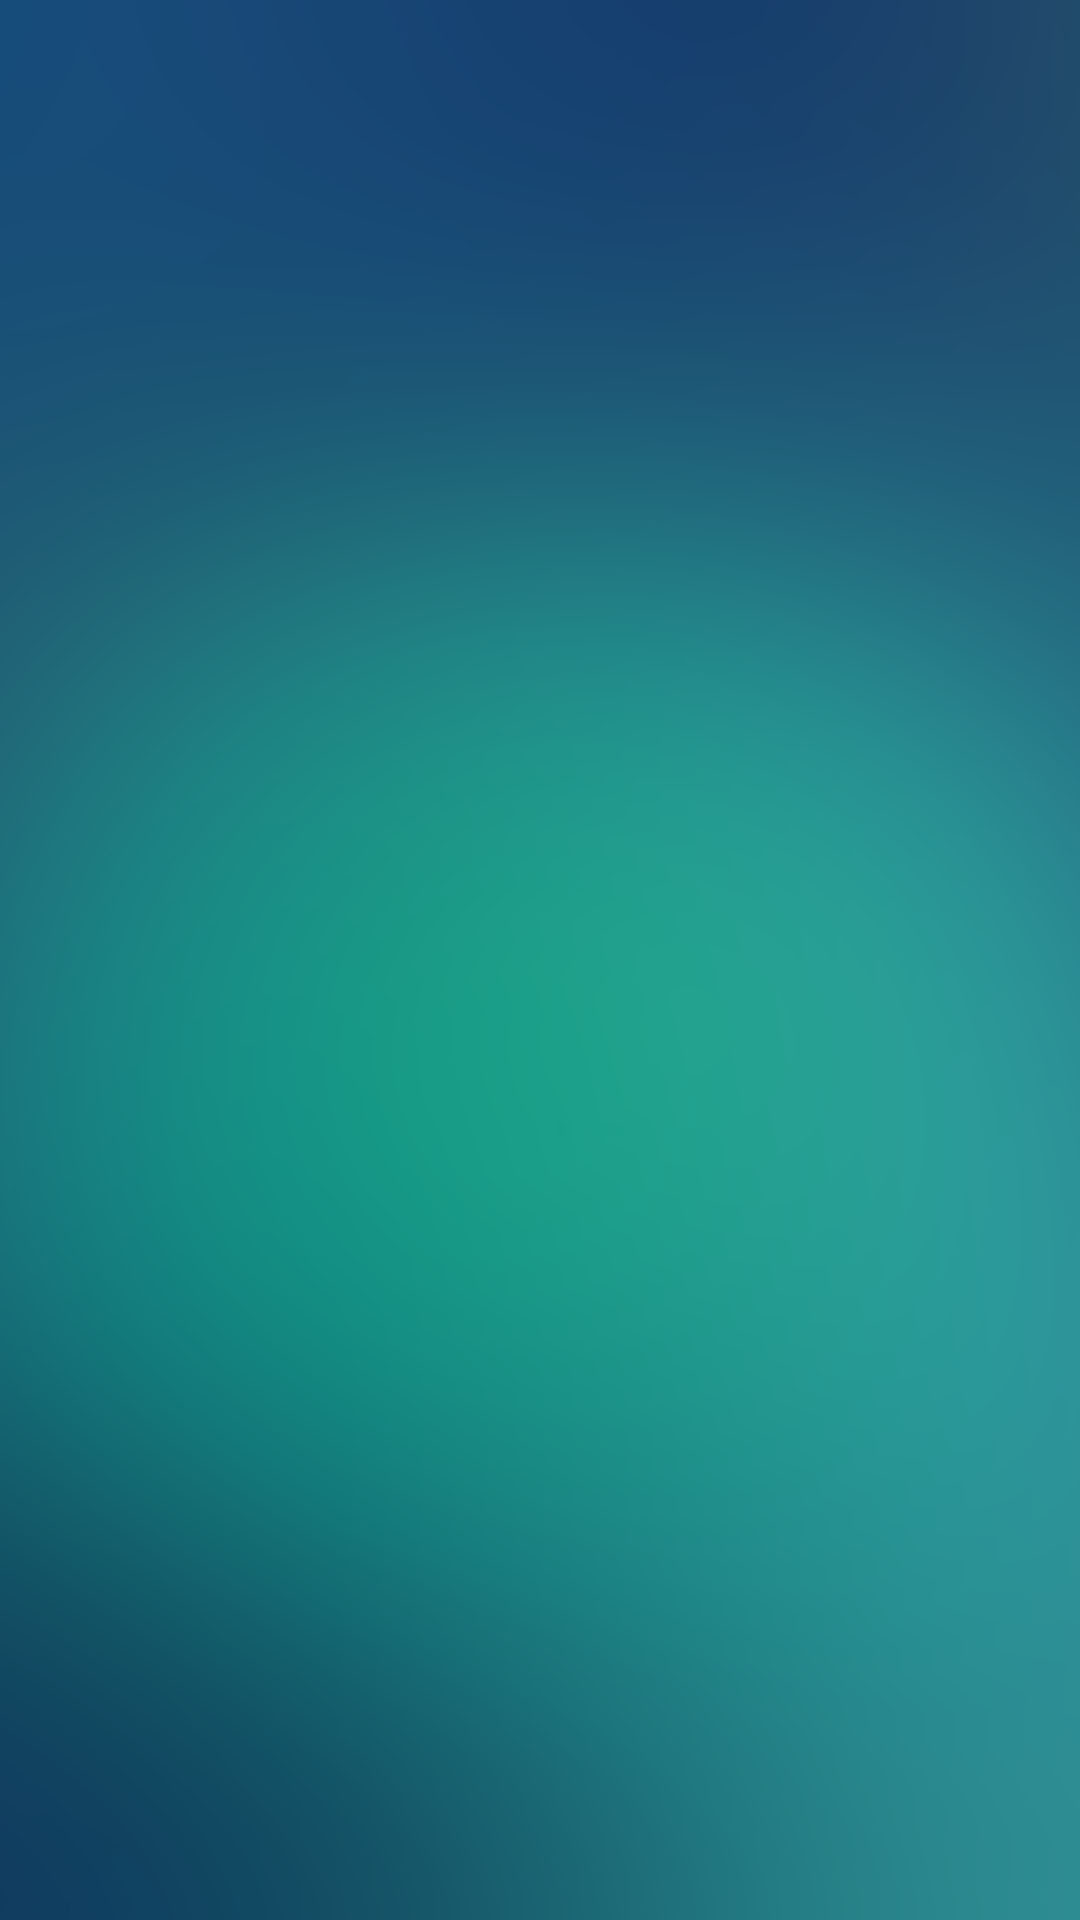 1080x1920 Blue Green Circle Gradient Android Wallpaper ...